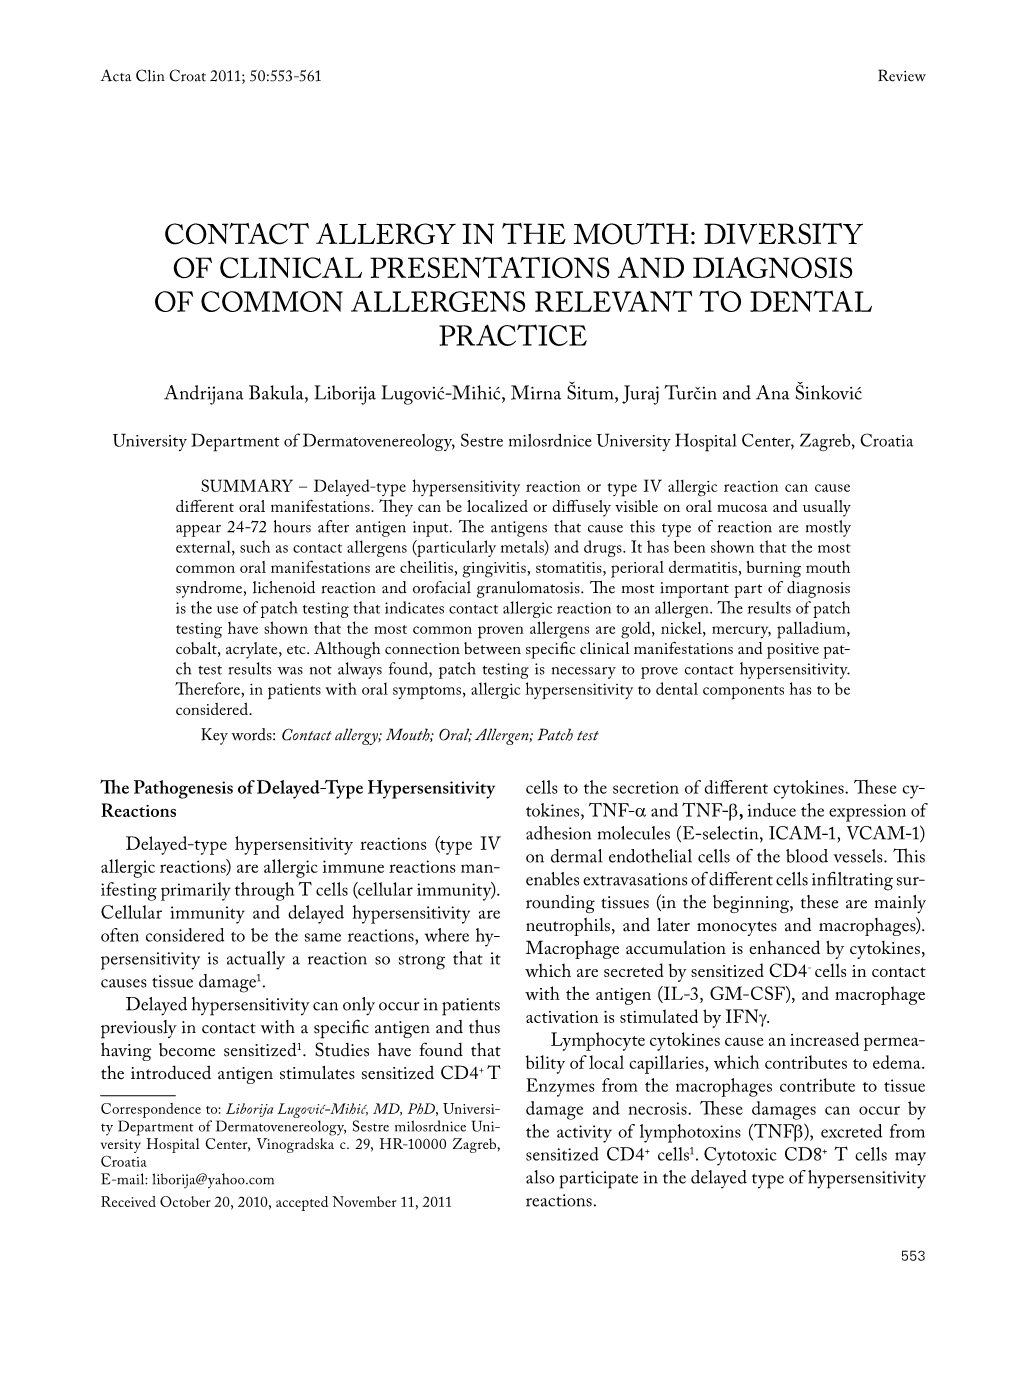 Contact Allergy in the Mouth: Diversity of Clinical Presentations and Diagnosis of Common Allergens Relevant to Dental Practice